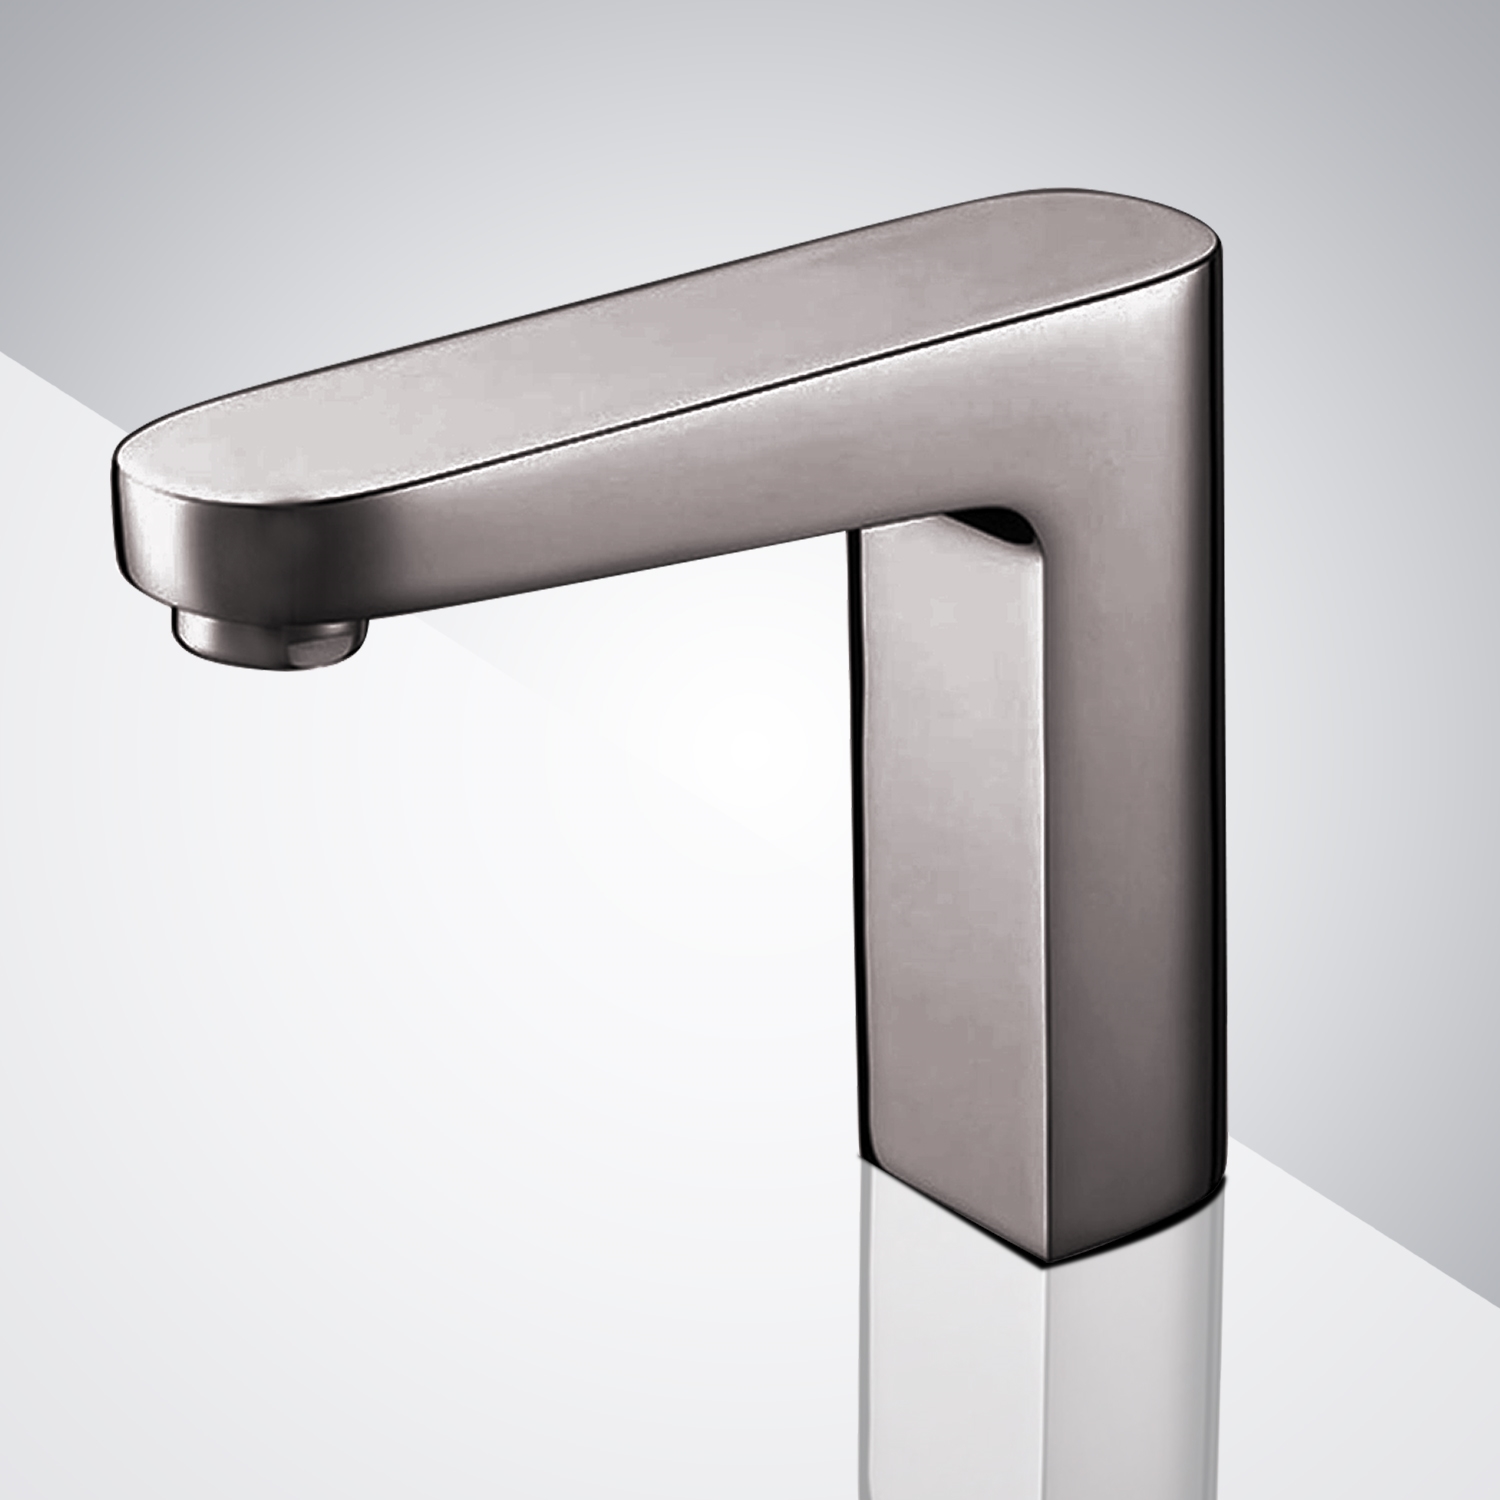 Fontana Commercial Brushed Nickel Touchless Automatic Sensor Sink Faucet